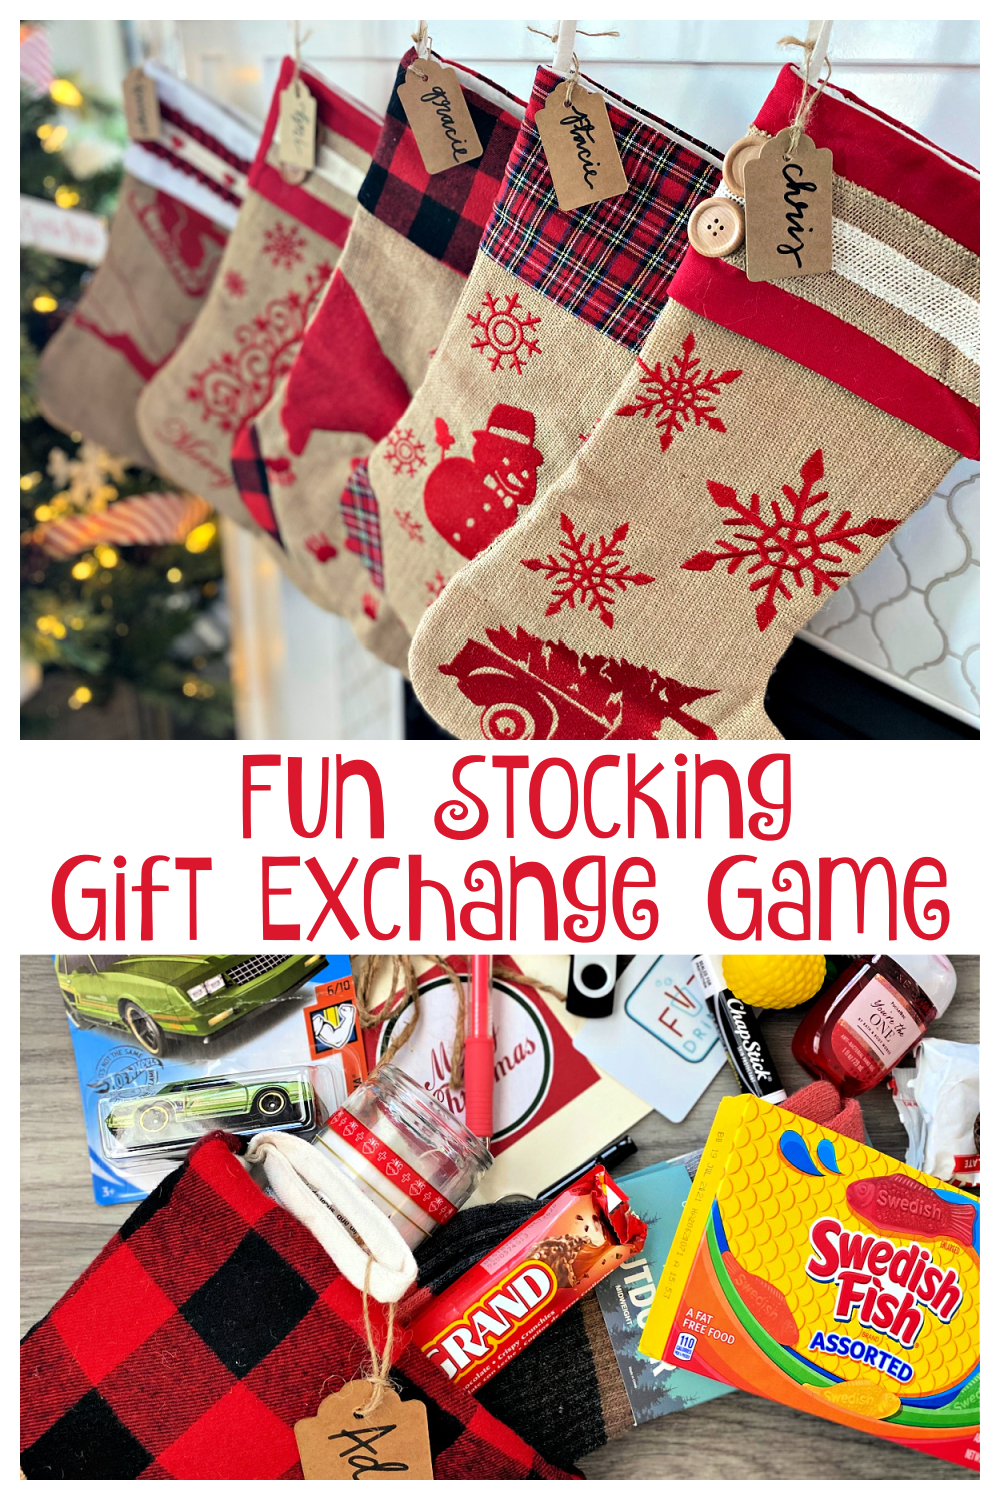 Stocking Gift Exchange Game. This fun gift exchange is perfect for any party and for all ages. #giftexchangegame #giftexchange #stockingstufferexchangegame